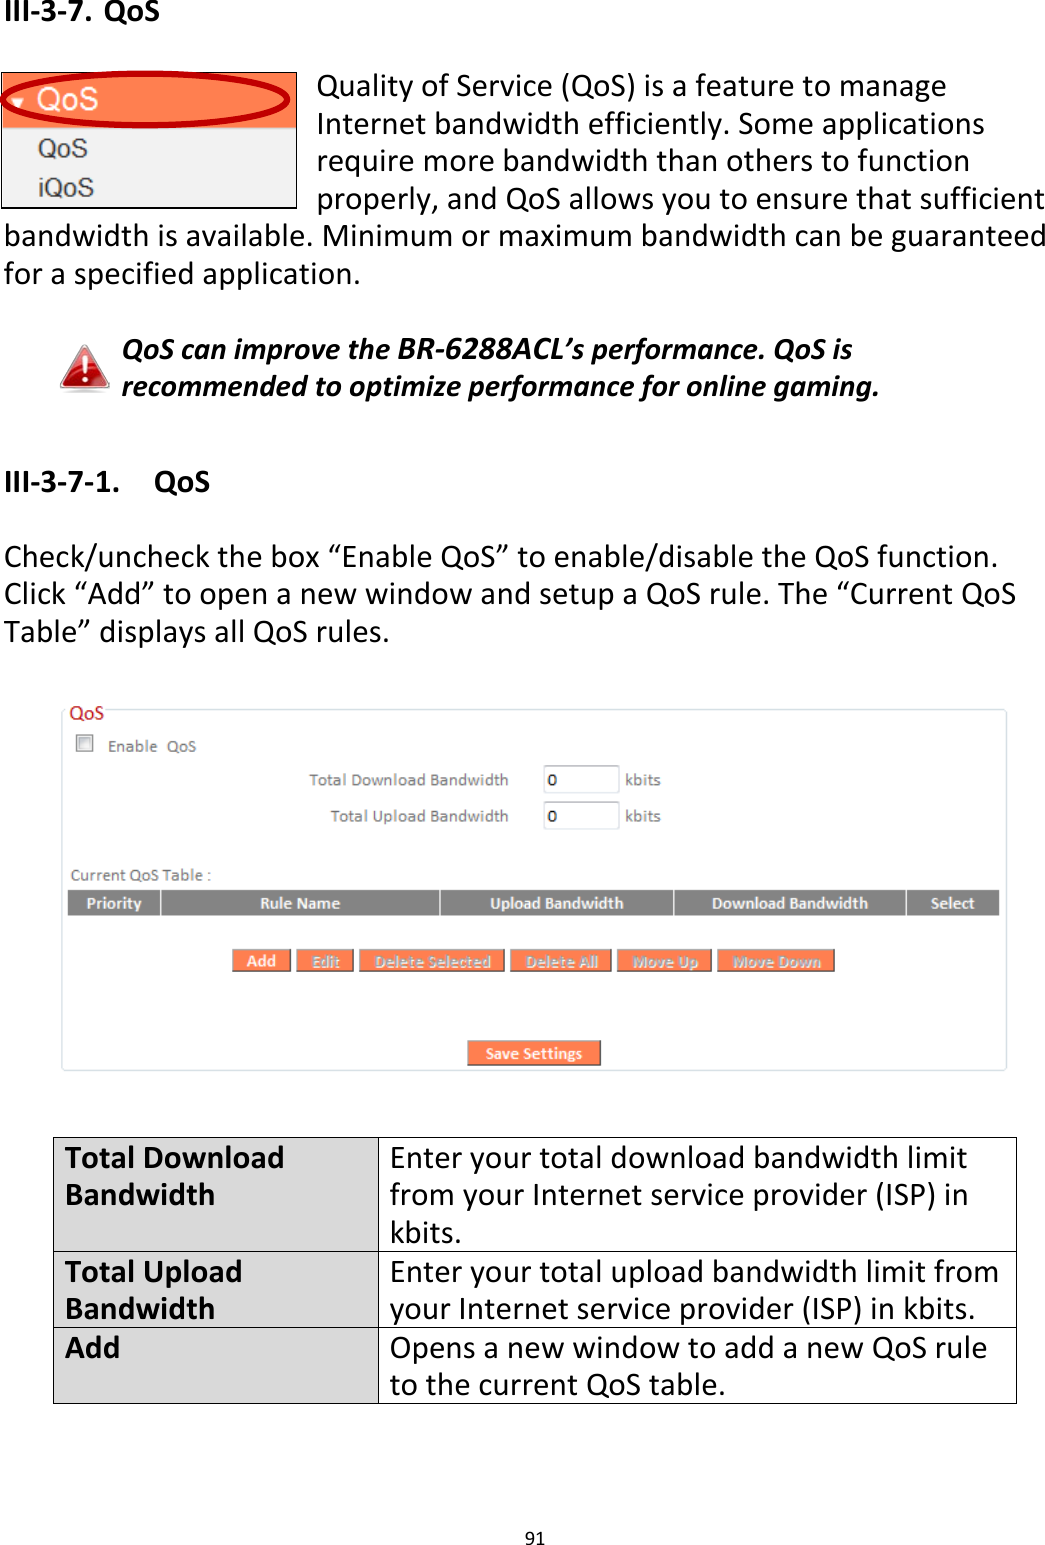 91  III-3-7. QoS  Quality of Service (QoS) is a feature to manage   Internet bandwidth efficiently. Some applications require more bandwidth than others to function properly, and QoS allows you to ensure that sufficient bandwidth is available. Minimum or maximum bandwidth can be guaranteed for a specified application.  QoS can improve the BR-6288ACL’s performance. QoS is recommended to optimize performance for online gaming.  III-3-7-1.  QoS  Check/uncheck the box “Enable QoS” to enable/disable the QoS function. Click “Add” to open a new window and setup a QoS rule. The “Current QoS Table” displays all QoS rules.    Total Download Bandwidth Enter your total download bandwidth limit from your Internet service provider (ISP) in kbits. Total Upload Bandwidth Enter your total upload bandwidth limit from your Internet service provider (ISP) in kbits. Add Opens a new window to add a new QoS rule to the current QoS table.  